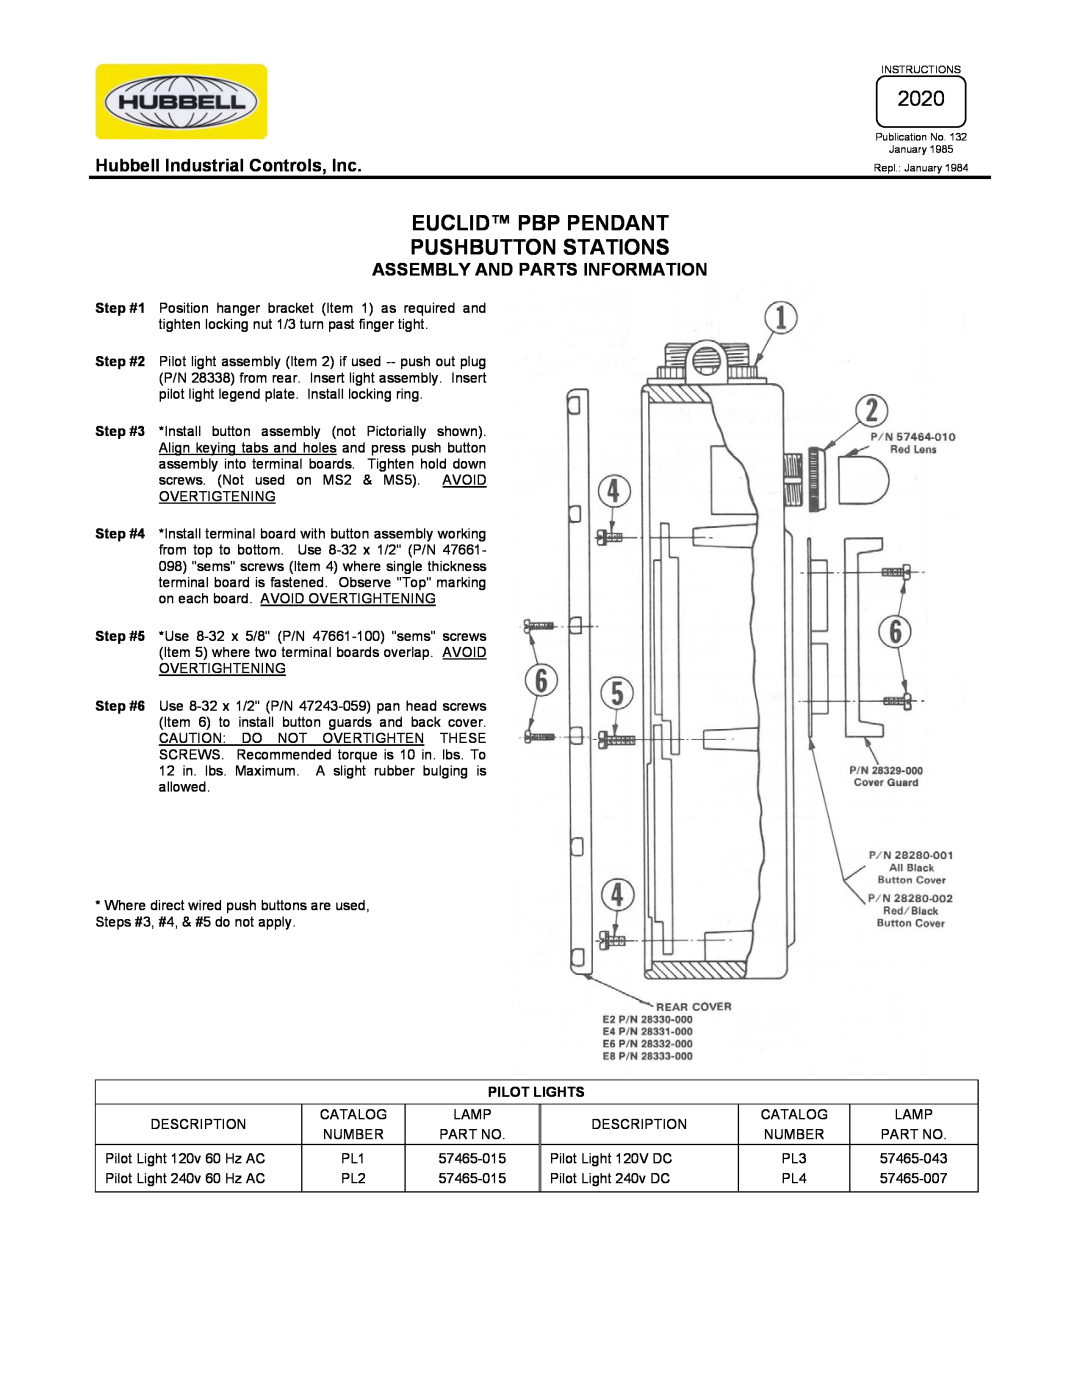 Hubbell PBP Pendant manual Hubbell Industrial Controls, Inc, Assembly And Parts Information, 2020, Pilot Lights 